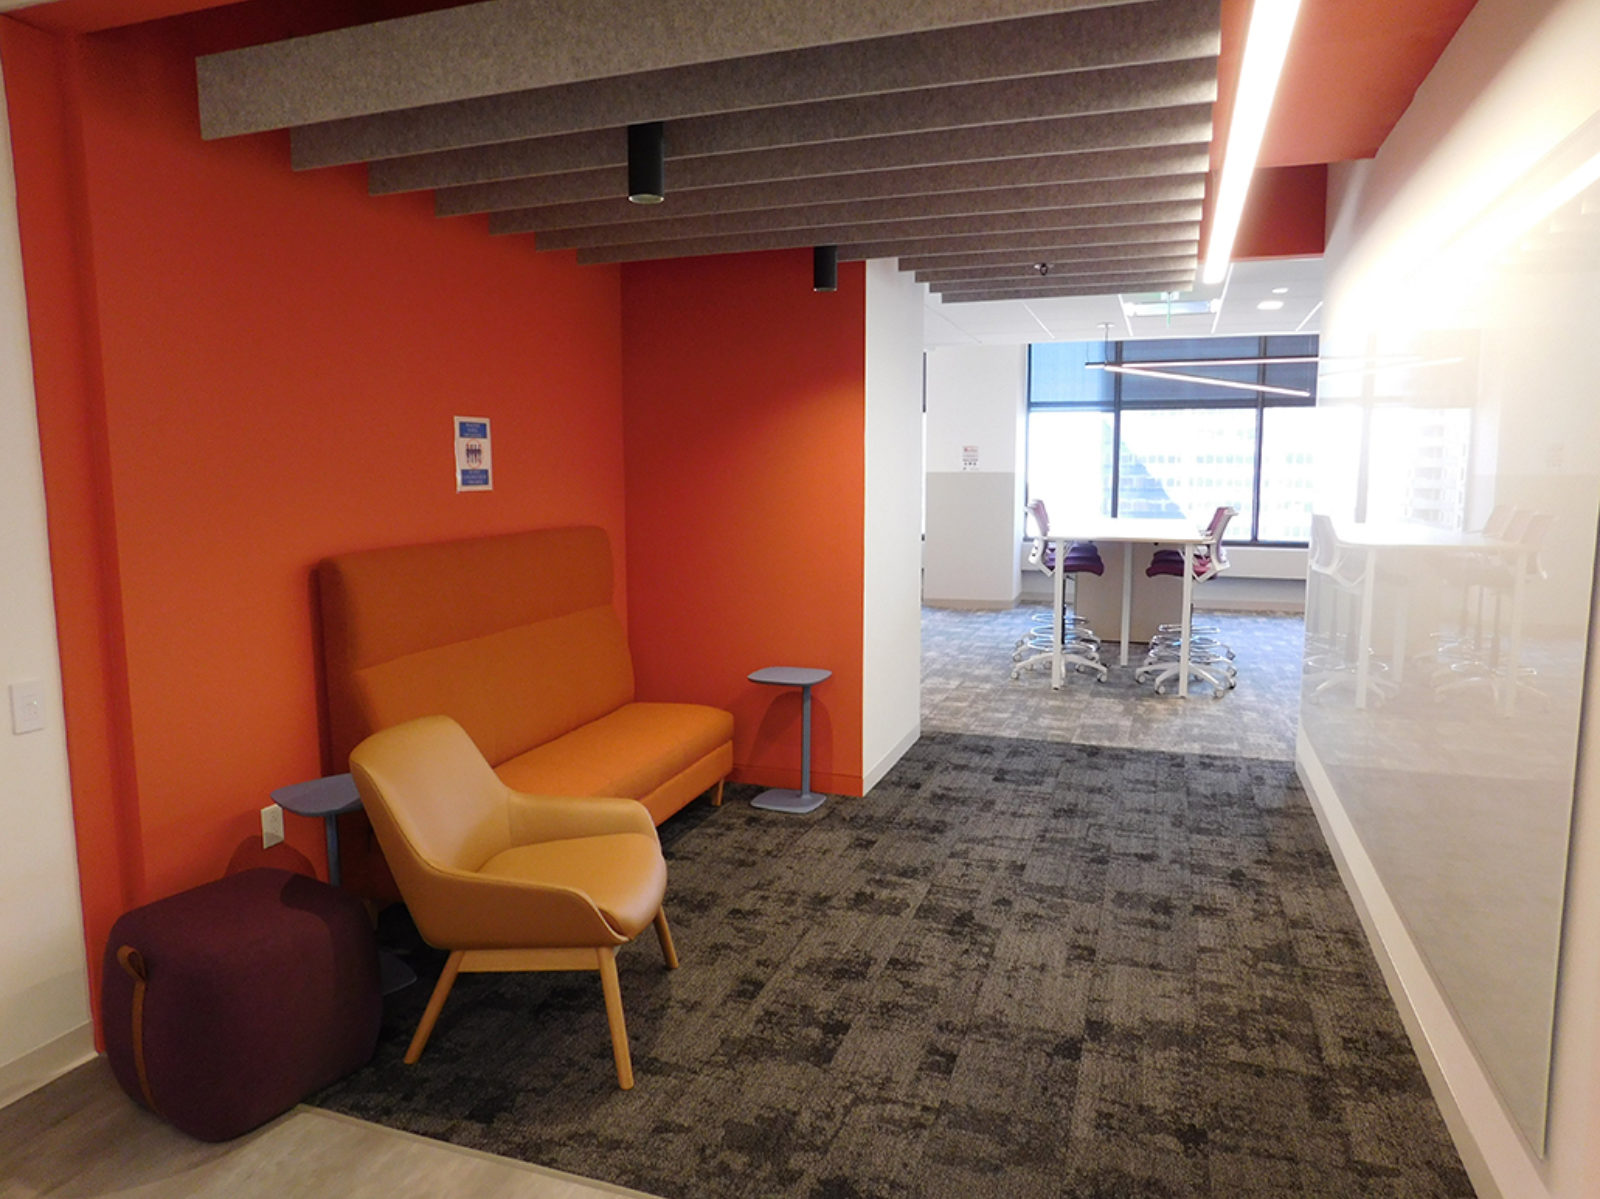 Orange wall with orange banquette seating, one mustard color lounge chair